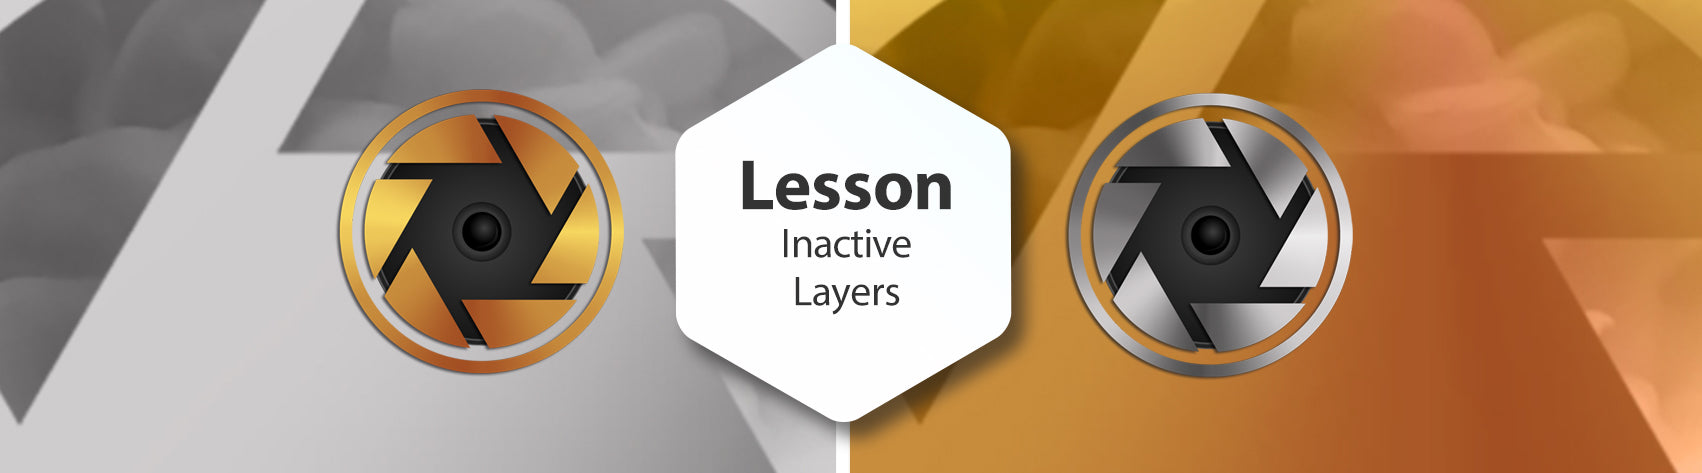 Lesson - Inactive Layers